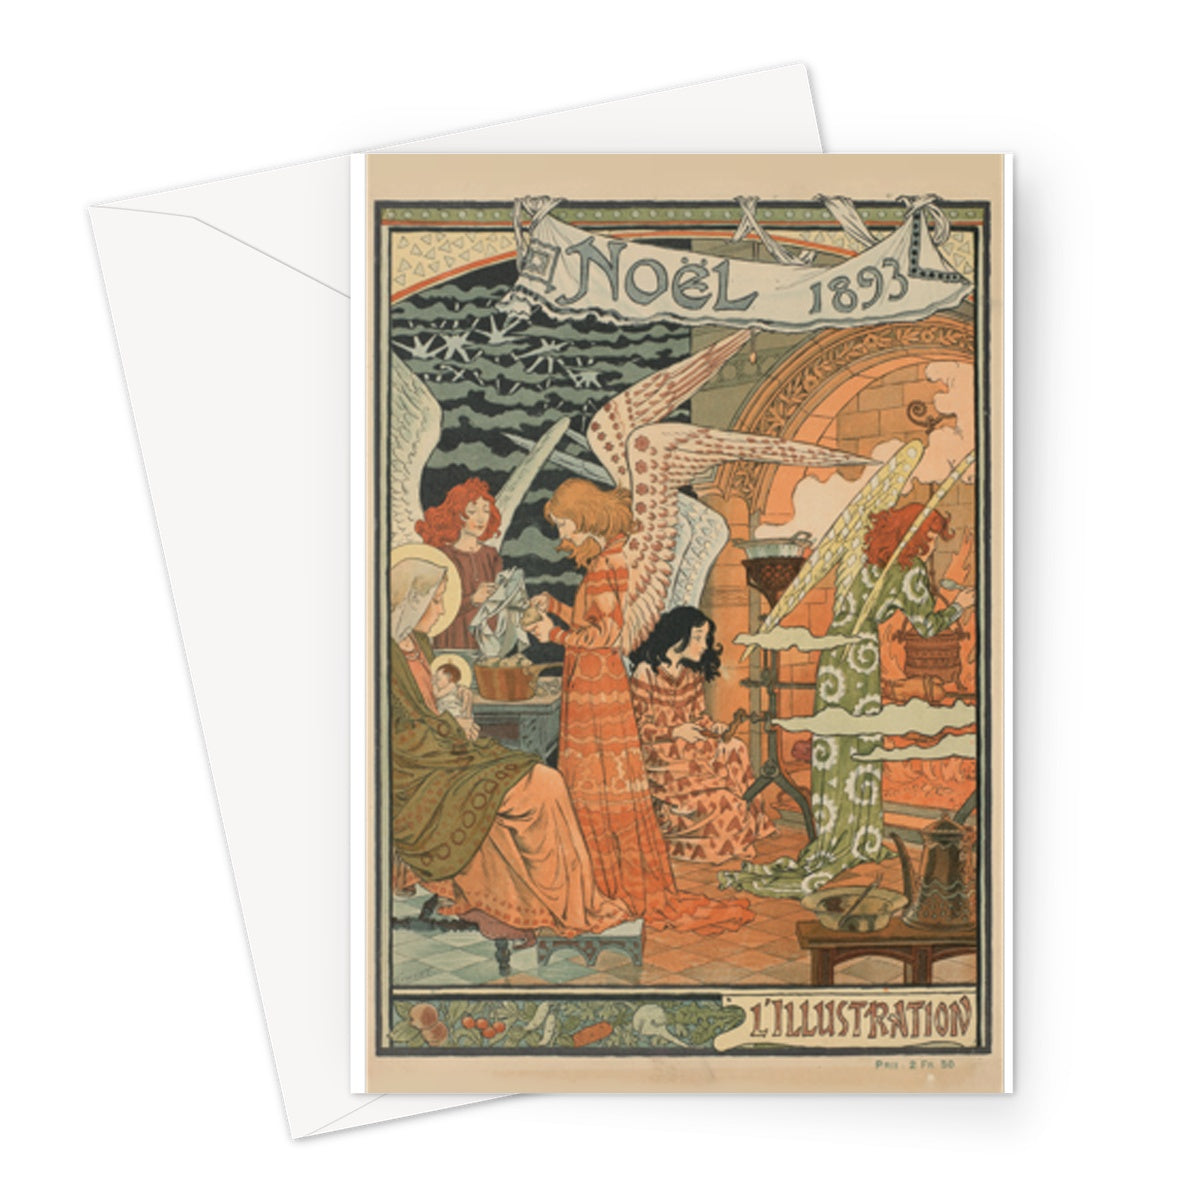 Cover for the Christmas issue 1893 from ‘l’Illustration’, anonymous, after Eugène Grasset, 1893 - Greeting Card